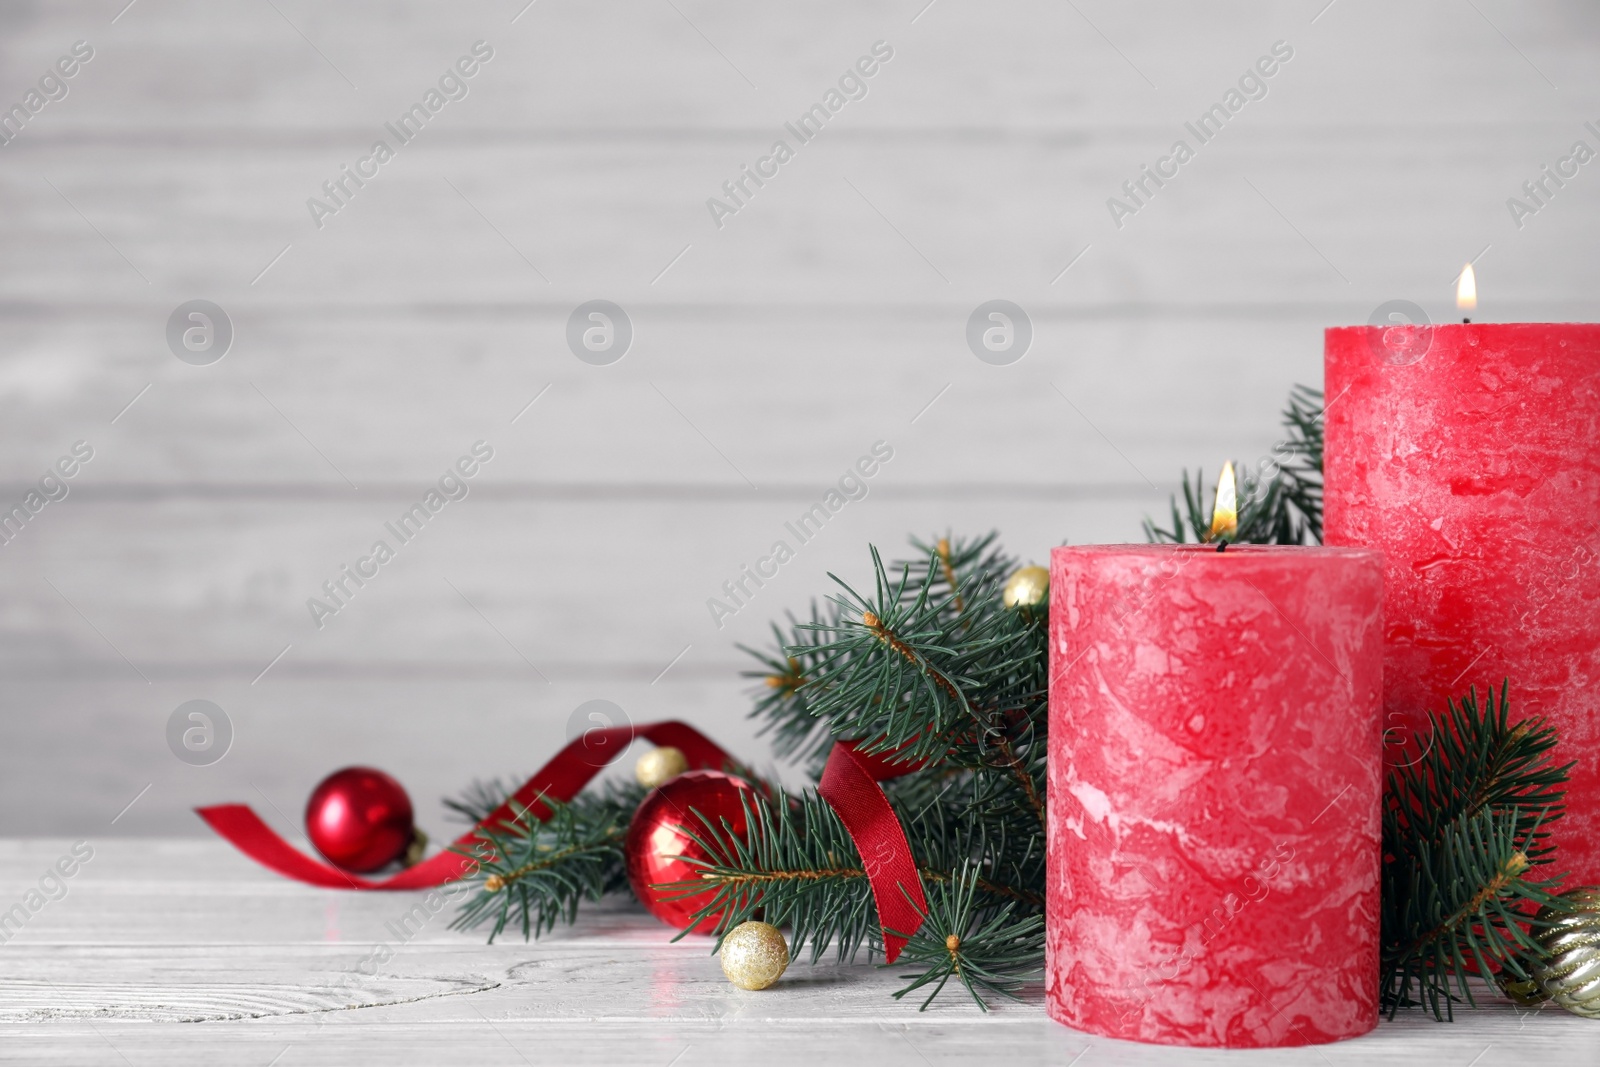 Photo of Burning red candles with Christmas decor on wooden table against light background. Space for text